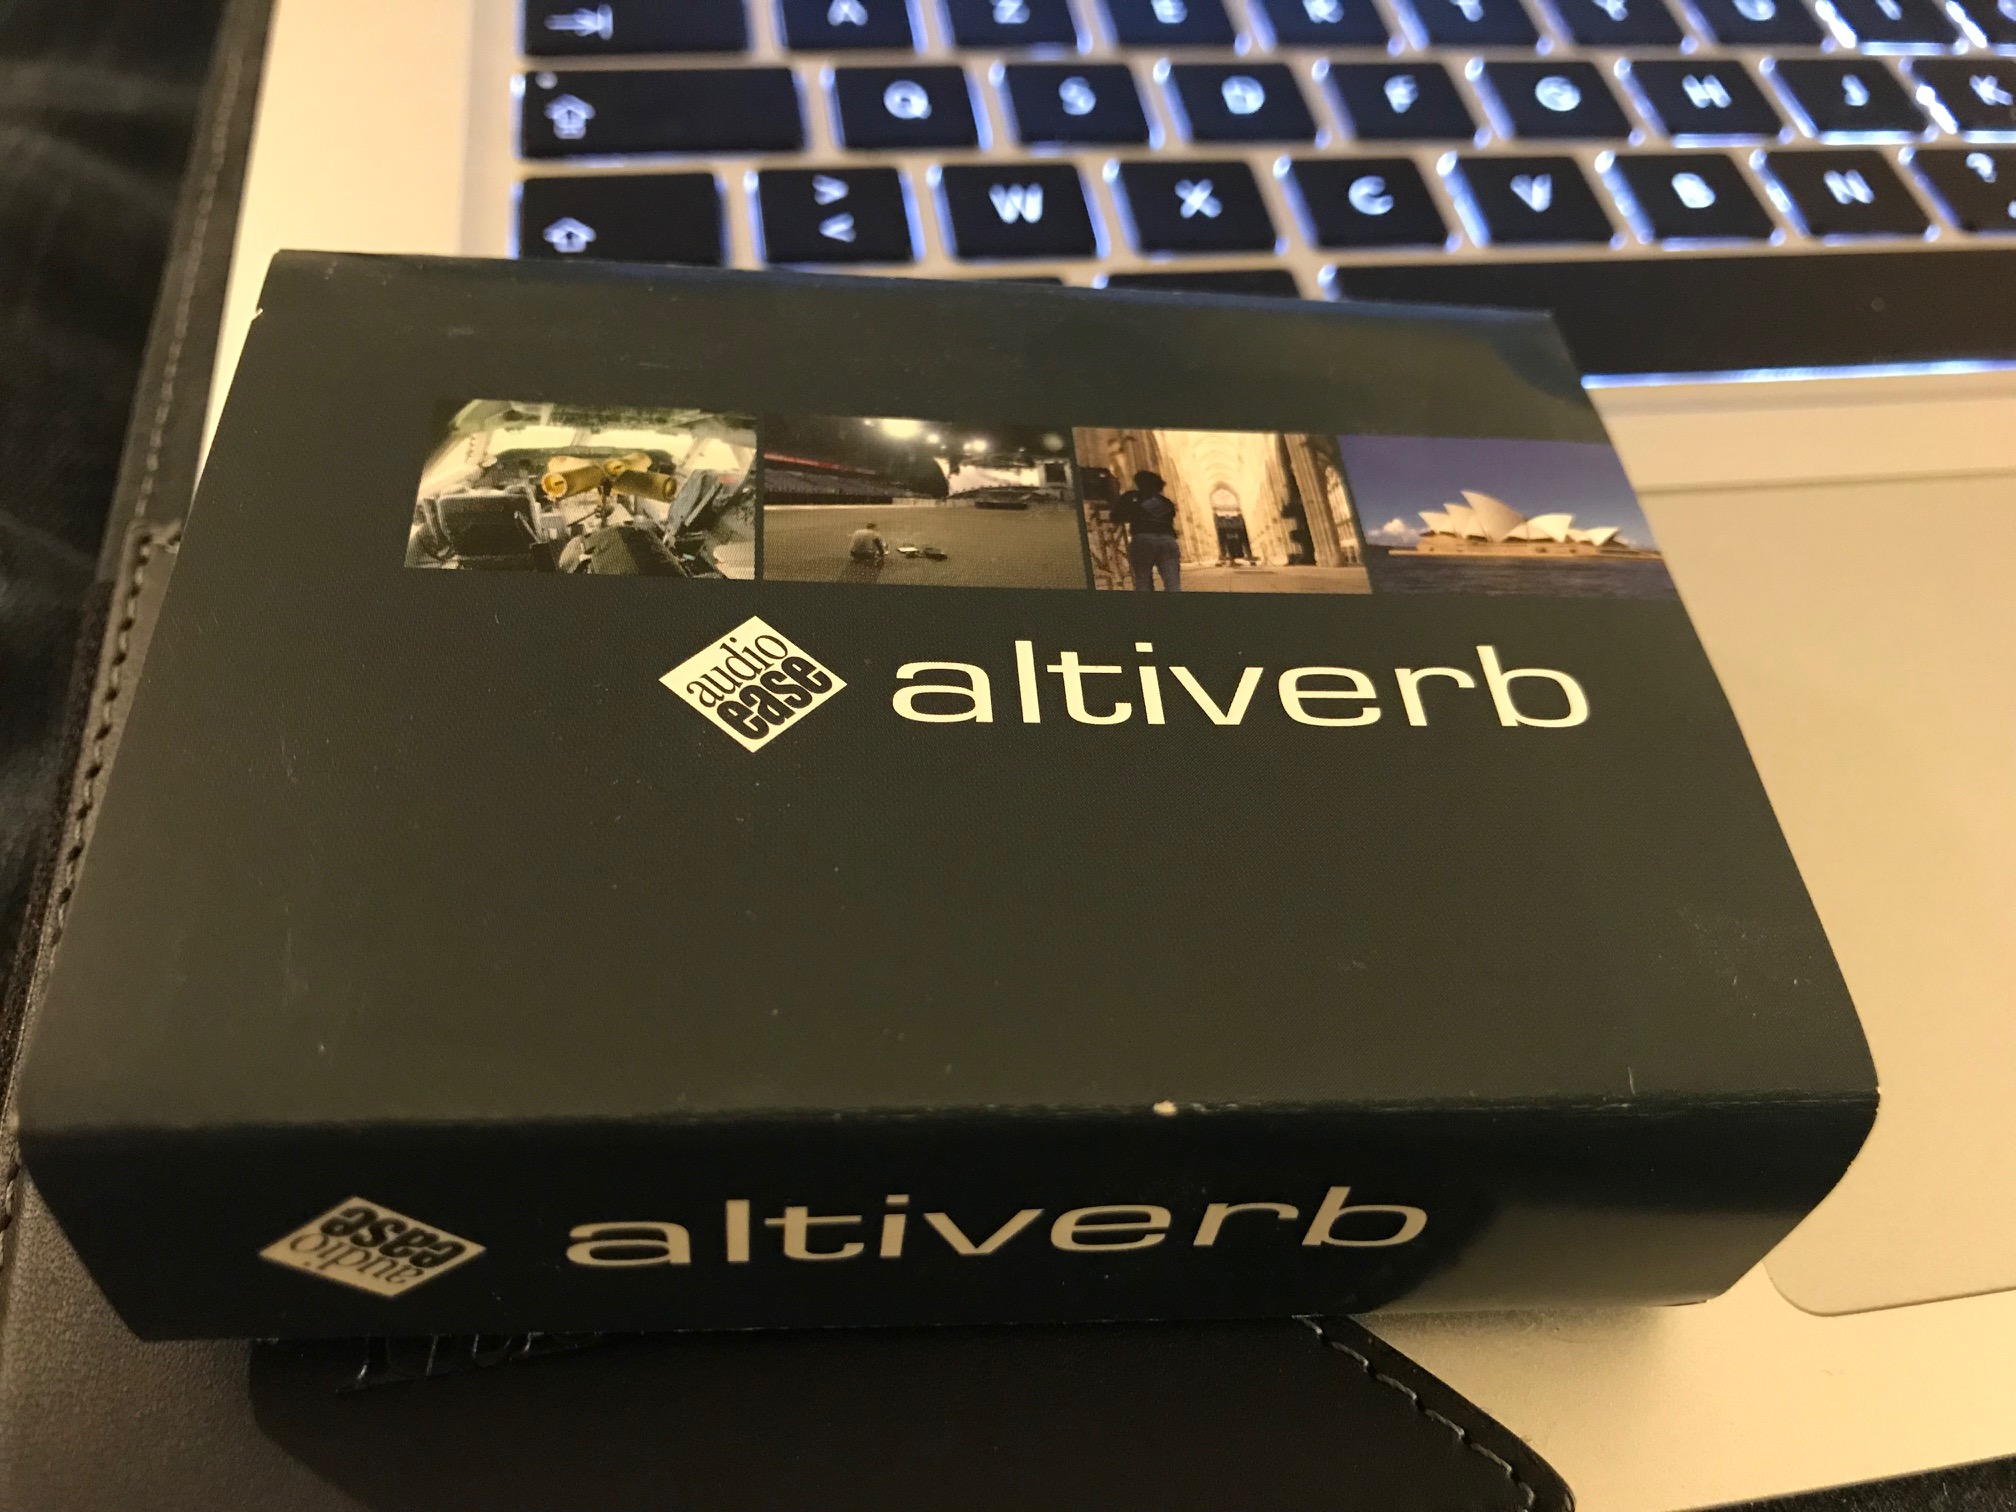 altiverb 7 student discount